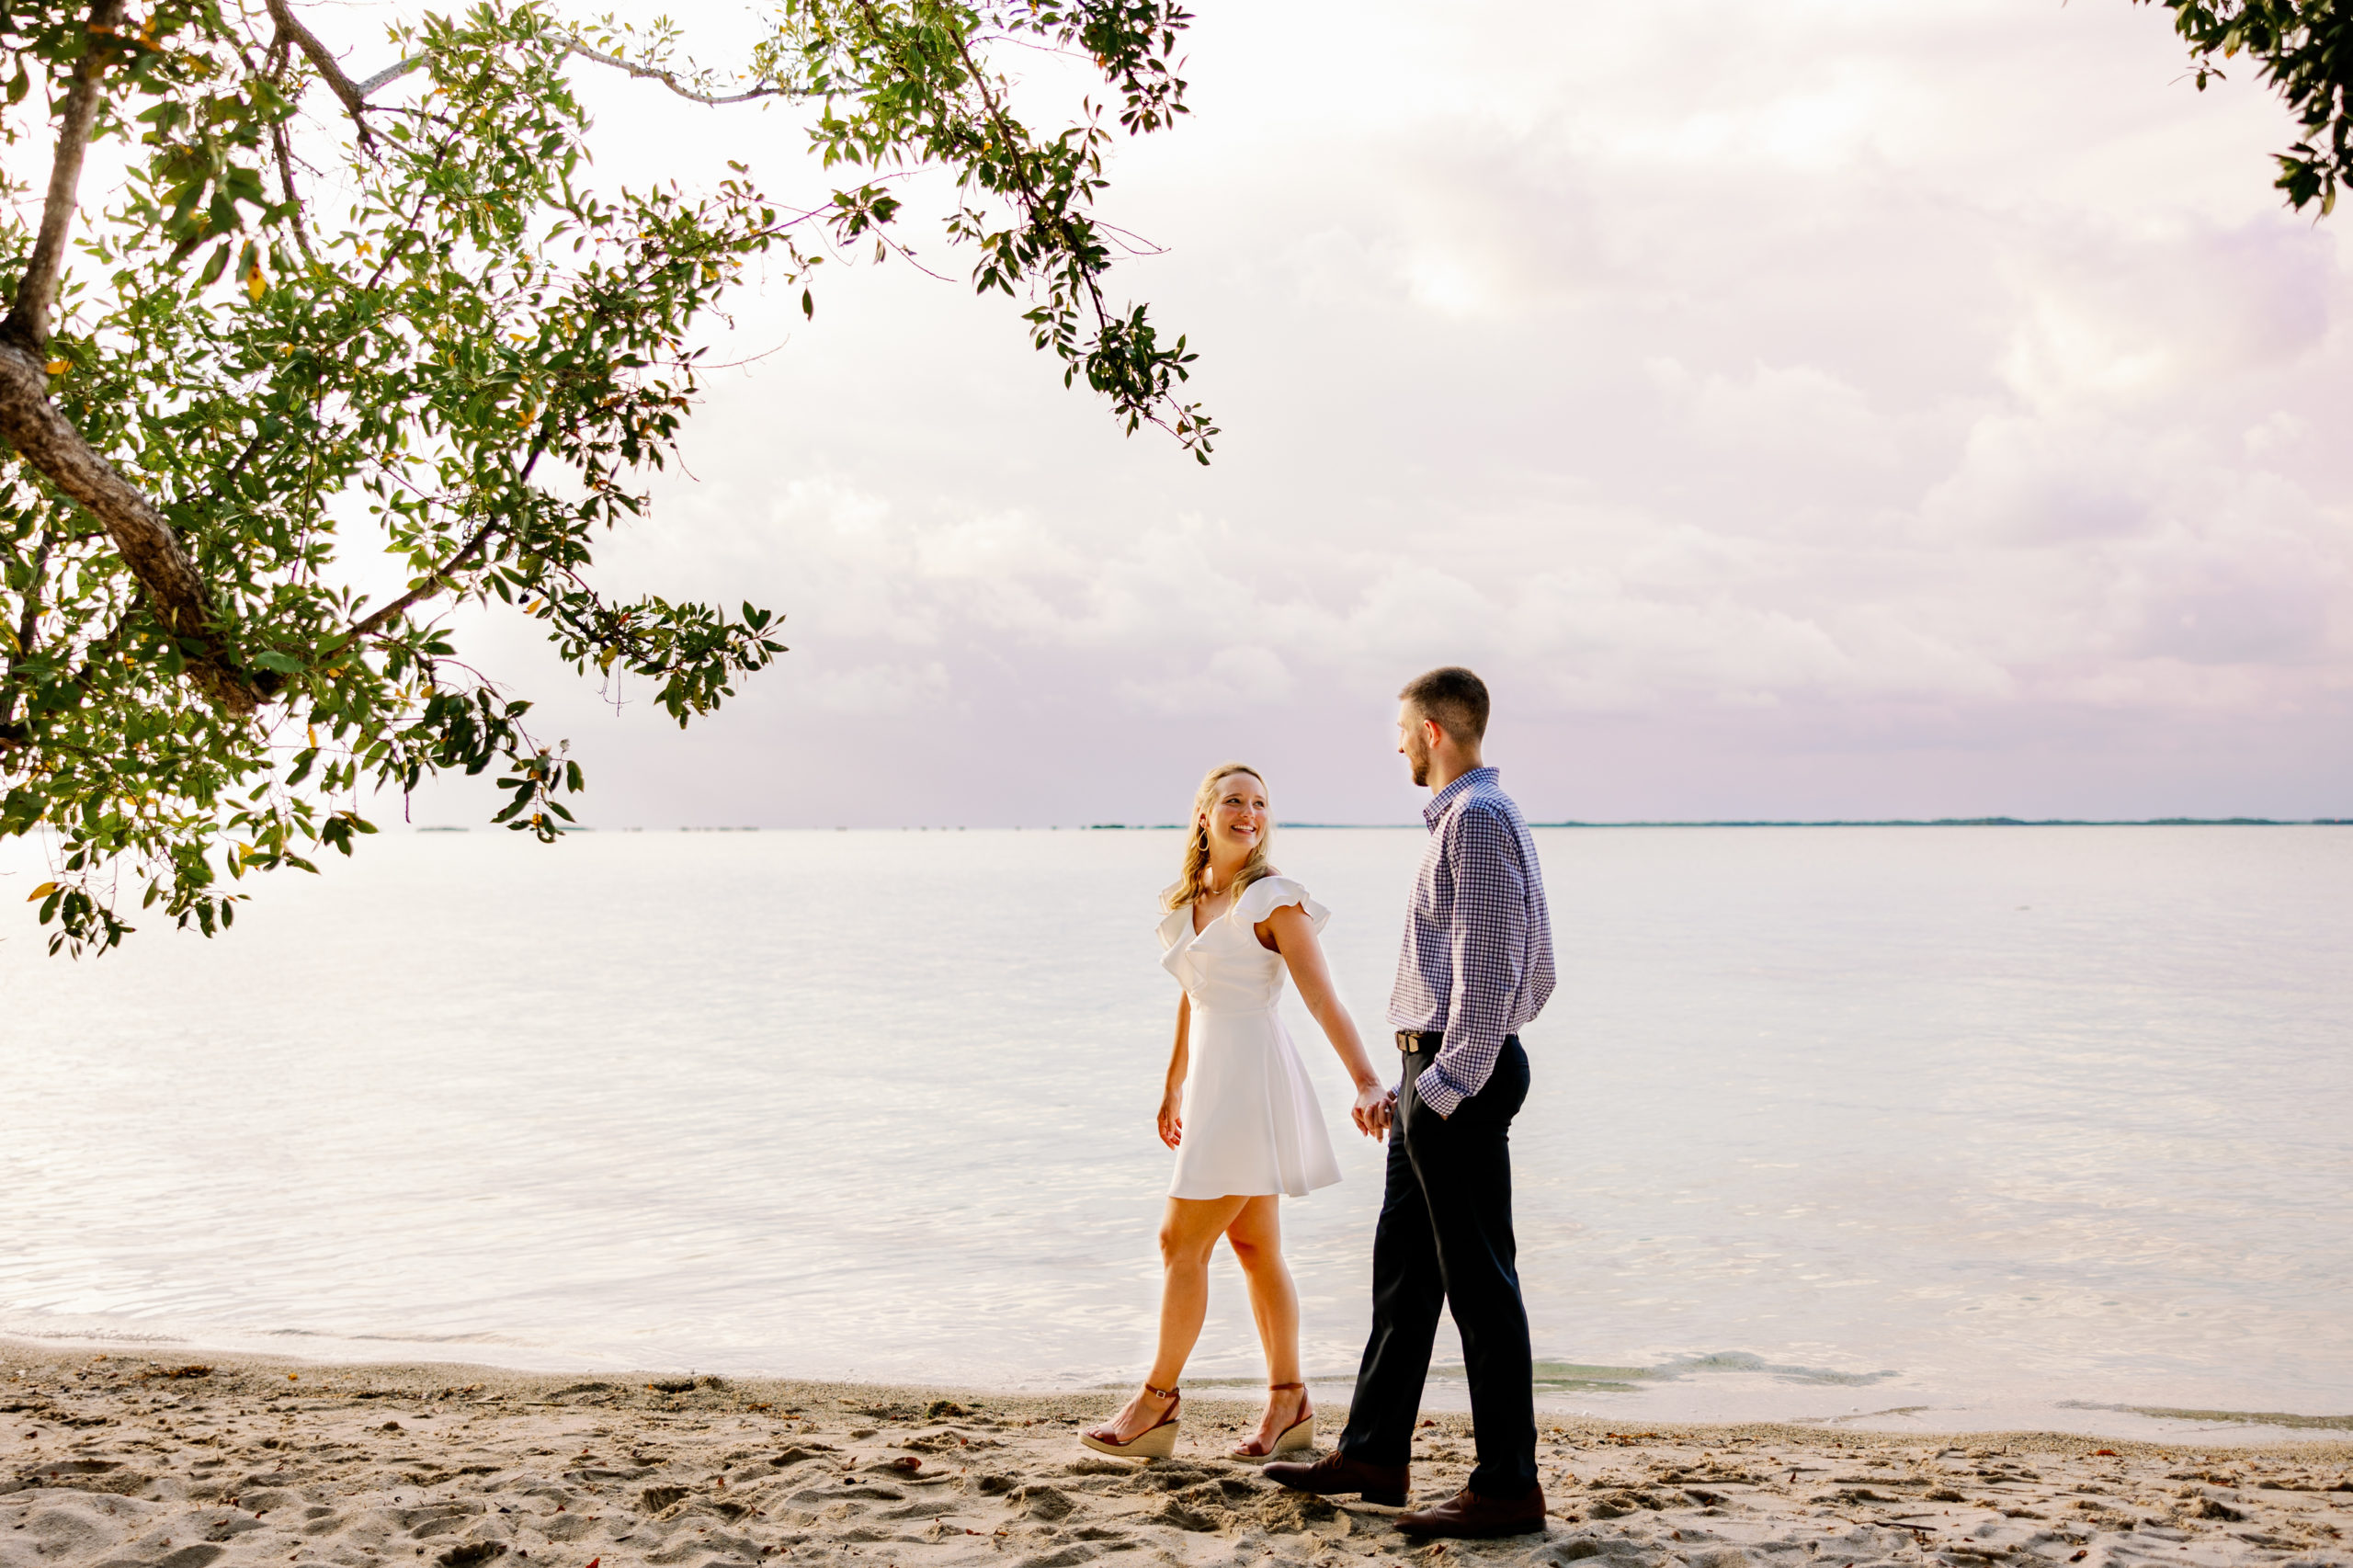 Baker's Cay Engagement Photos, Baker's Cay Engagement Photographer, Islamorada Wedding Photographer, Islamorada Engagement Photographer, Claudia Rios Photography